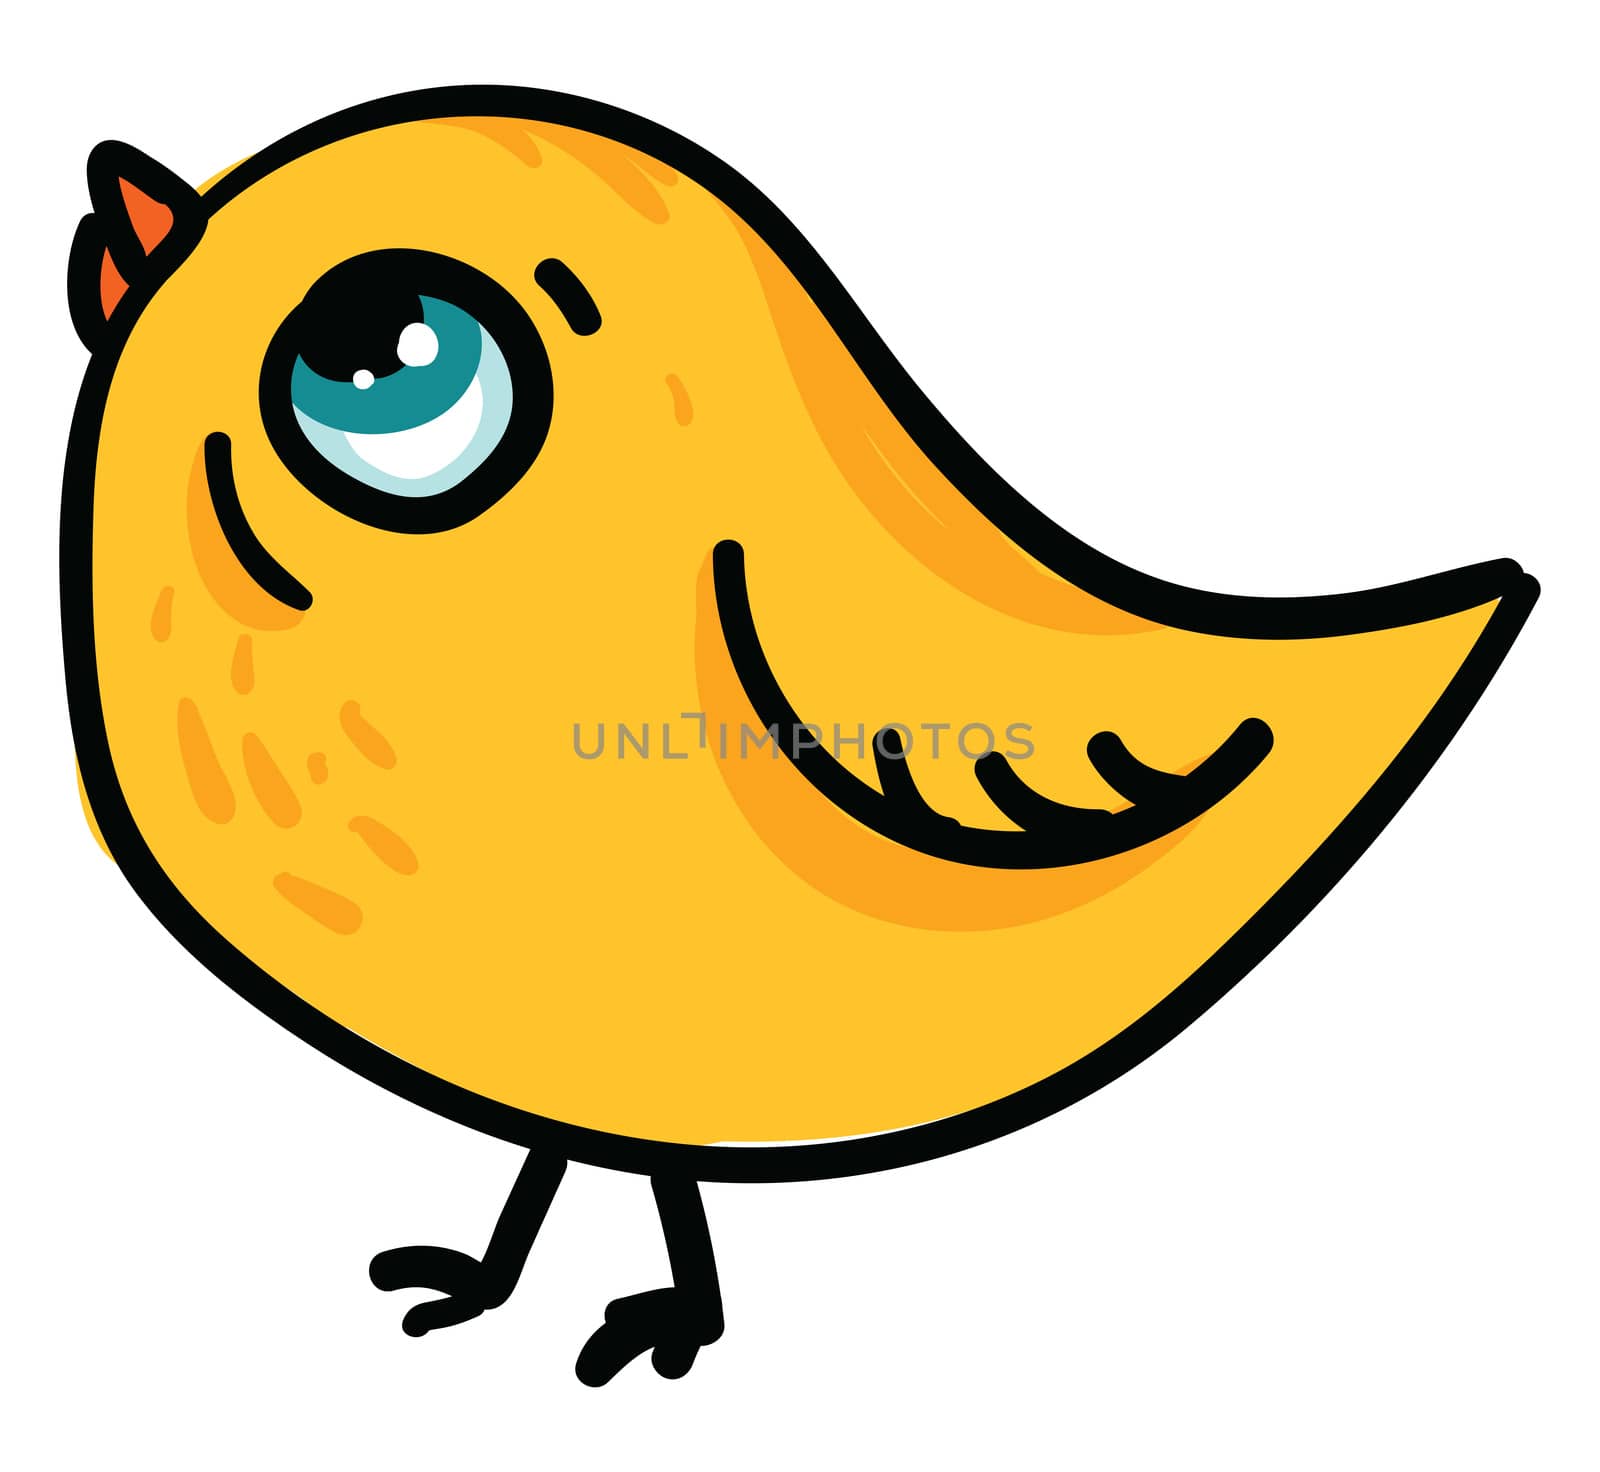 Small chick , illustration, vector on white background by Morphart